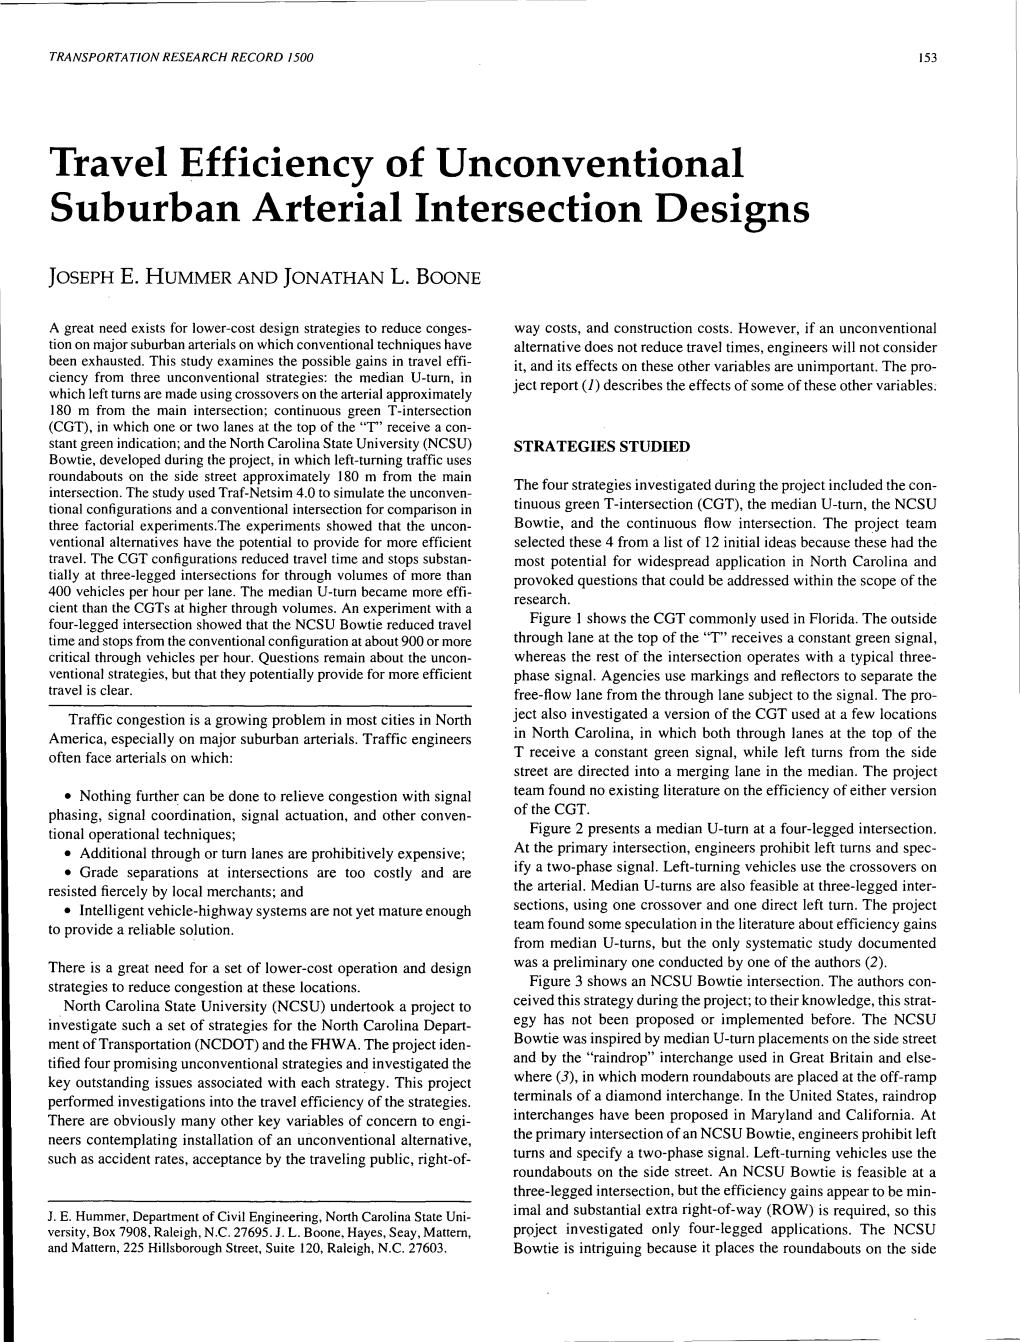 Travel Efficiency of Unconventional Suburban Arterial Intersection Designs